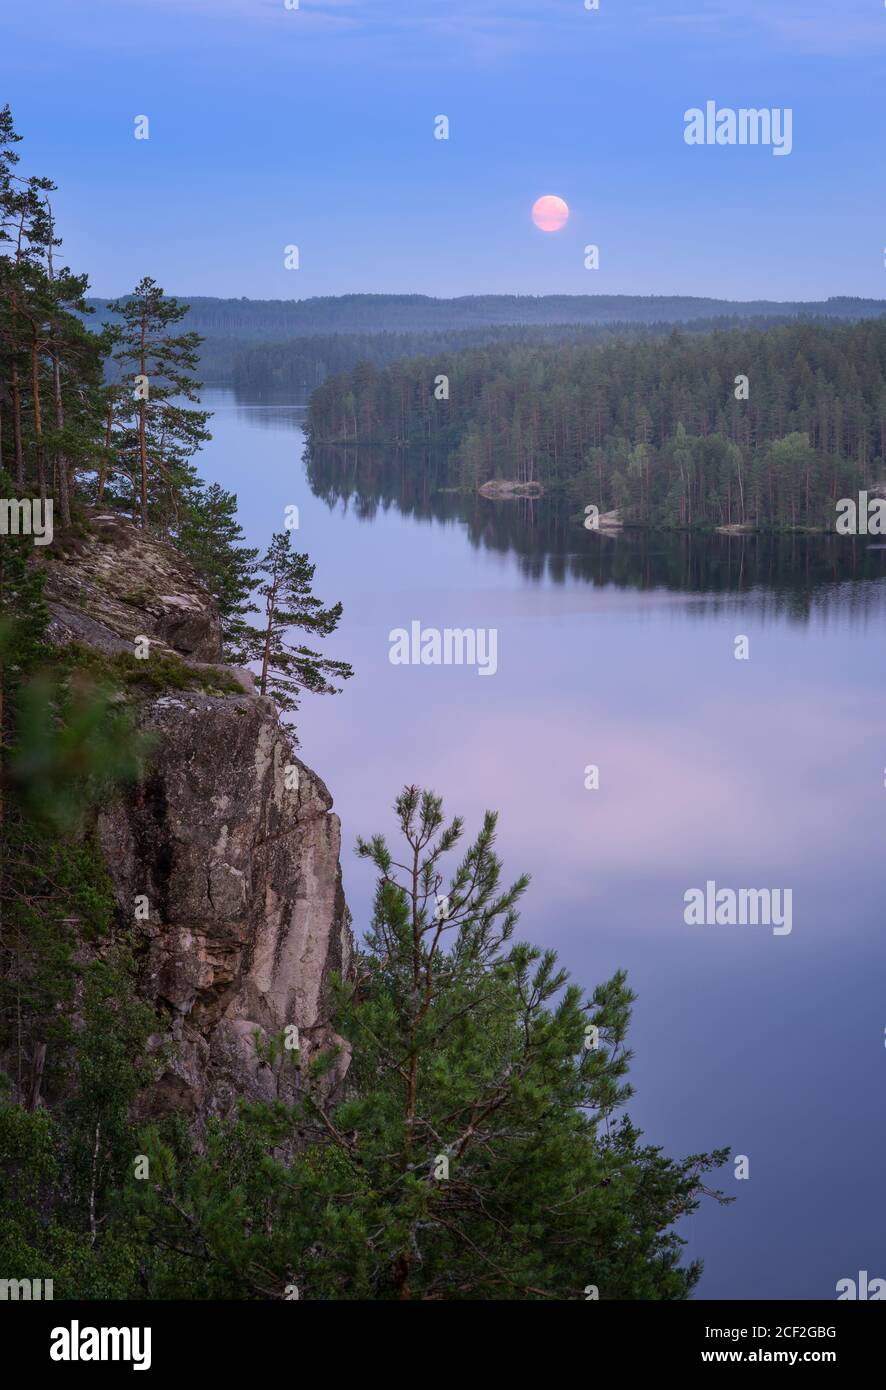 Mood moonlight landscape with calm forest and lake at summer night in Finland Stock Photo